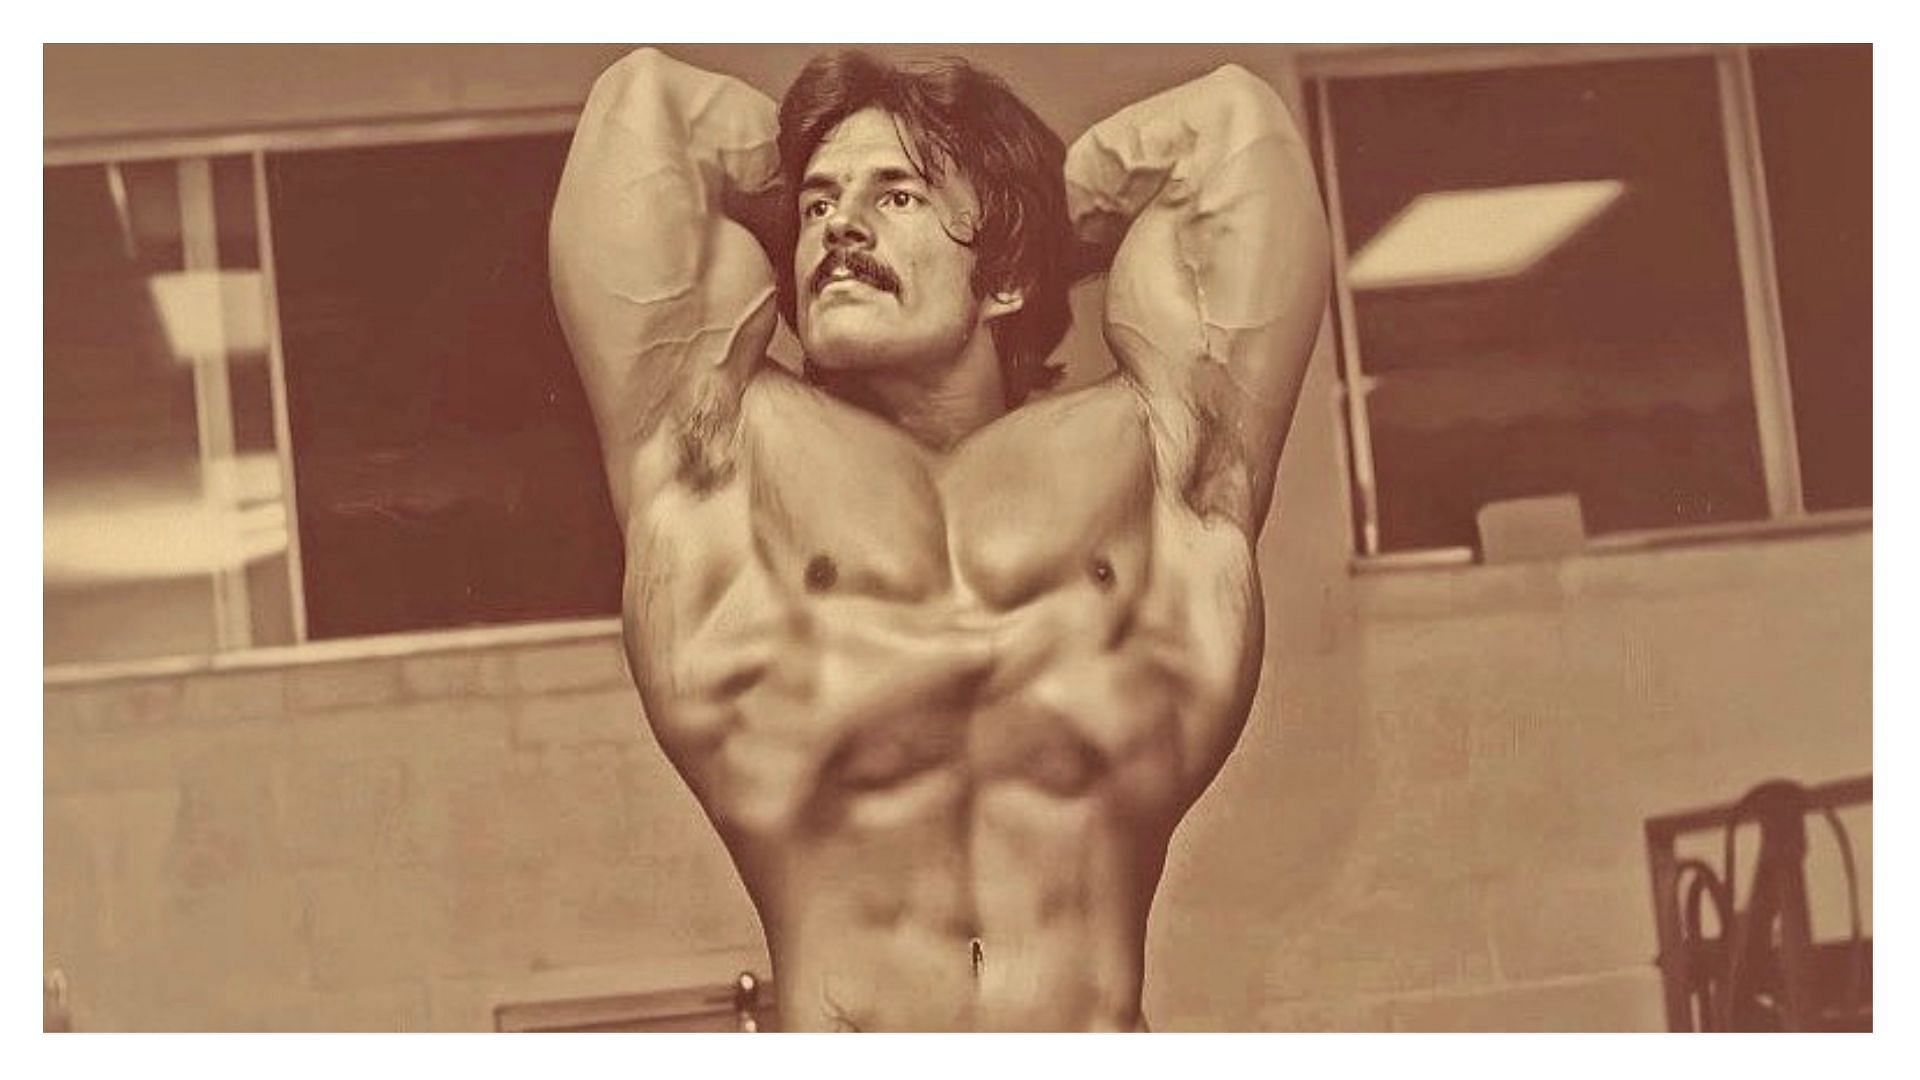 Achieve muscular upper body like Mike Mentzer with these exercises. (Image by @mentzerhd via Instagram)